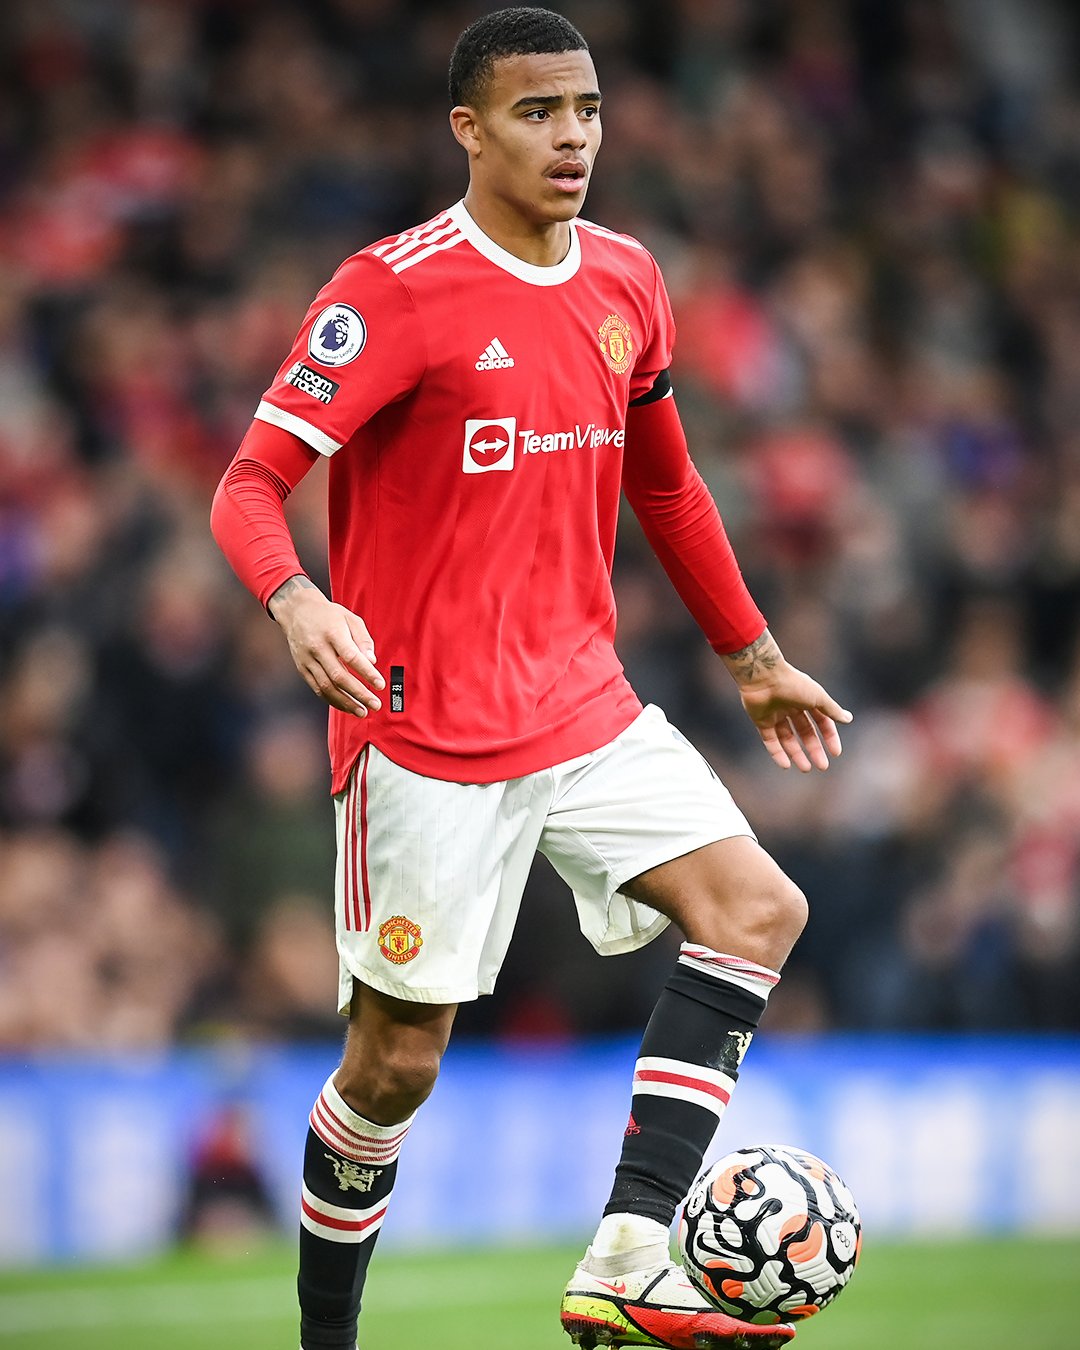 Manchester United’s Mason Greenwood arrested for rape and assault